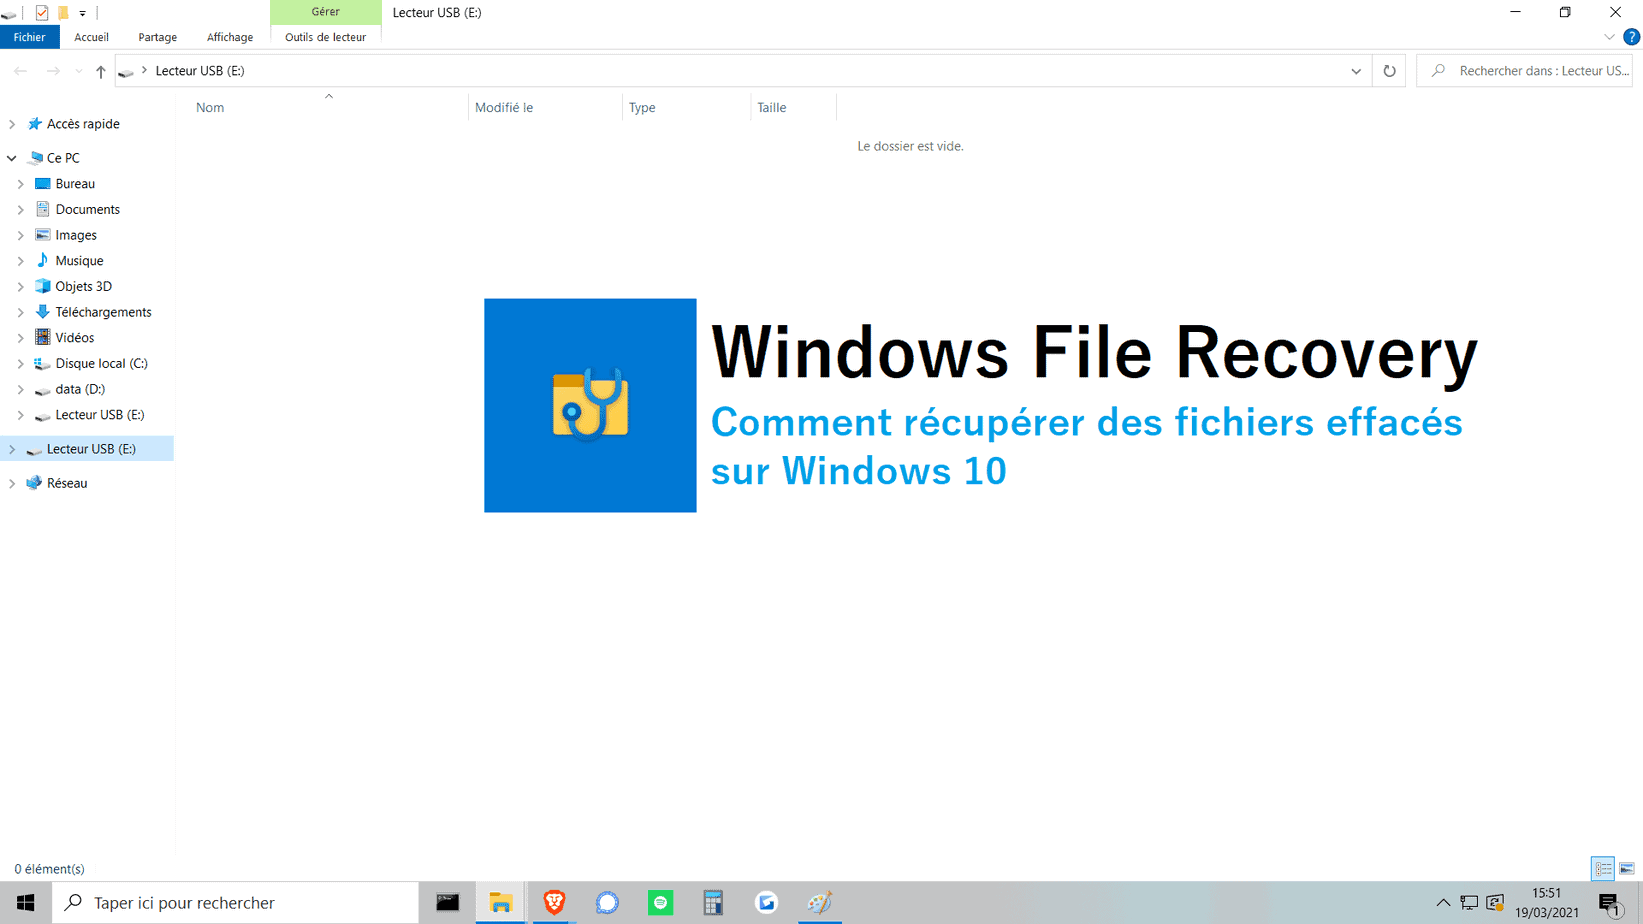 Windows File Recovery Cover